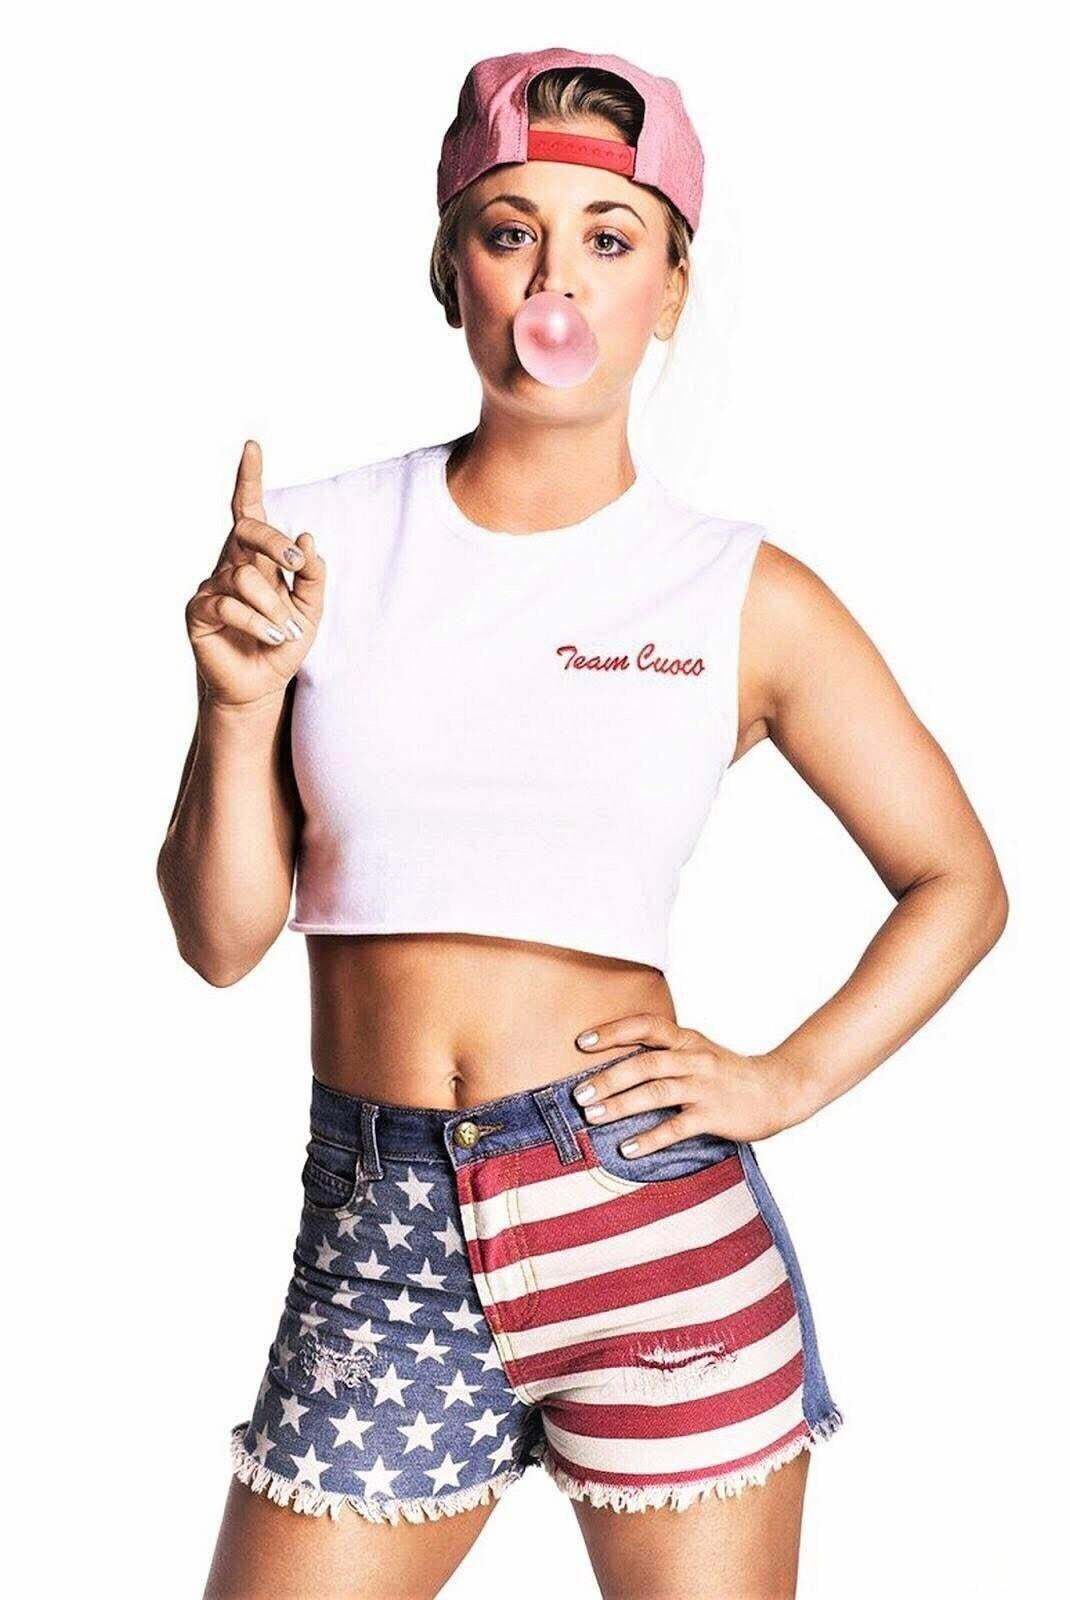 Kaley Cuoco is so hot blowing a bubble from her gum, what would you do?